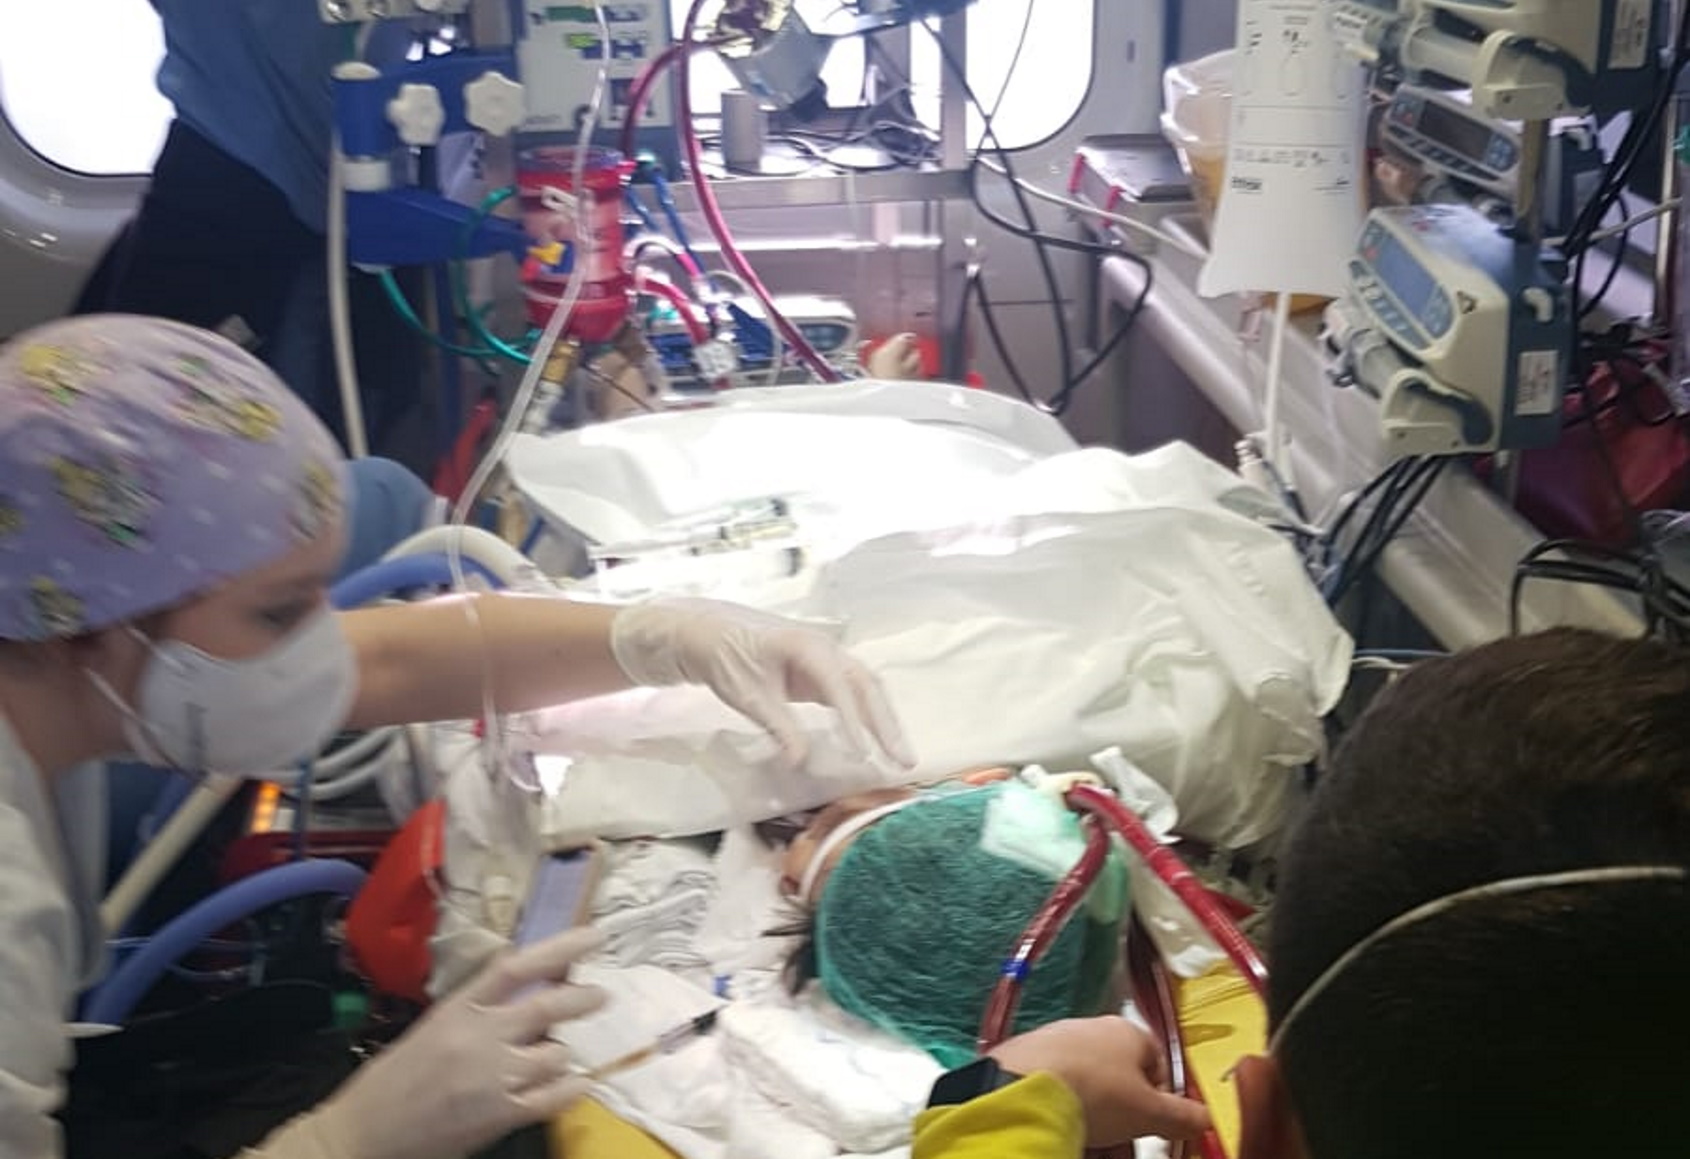 A 7-year-old boy is airlifted from Onasio to a hospital in Rome for a heart transplant